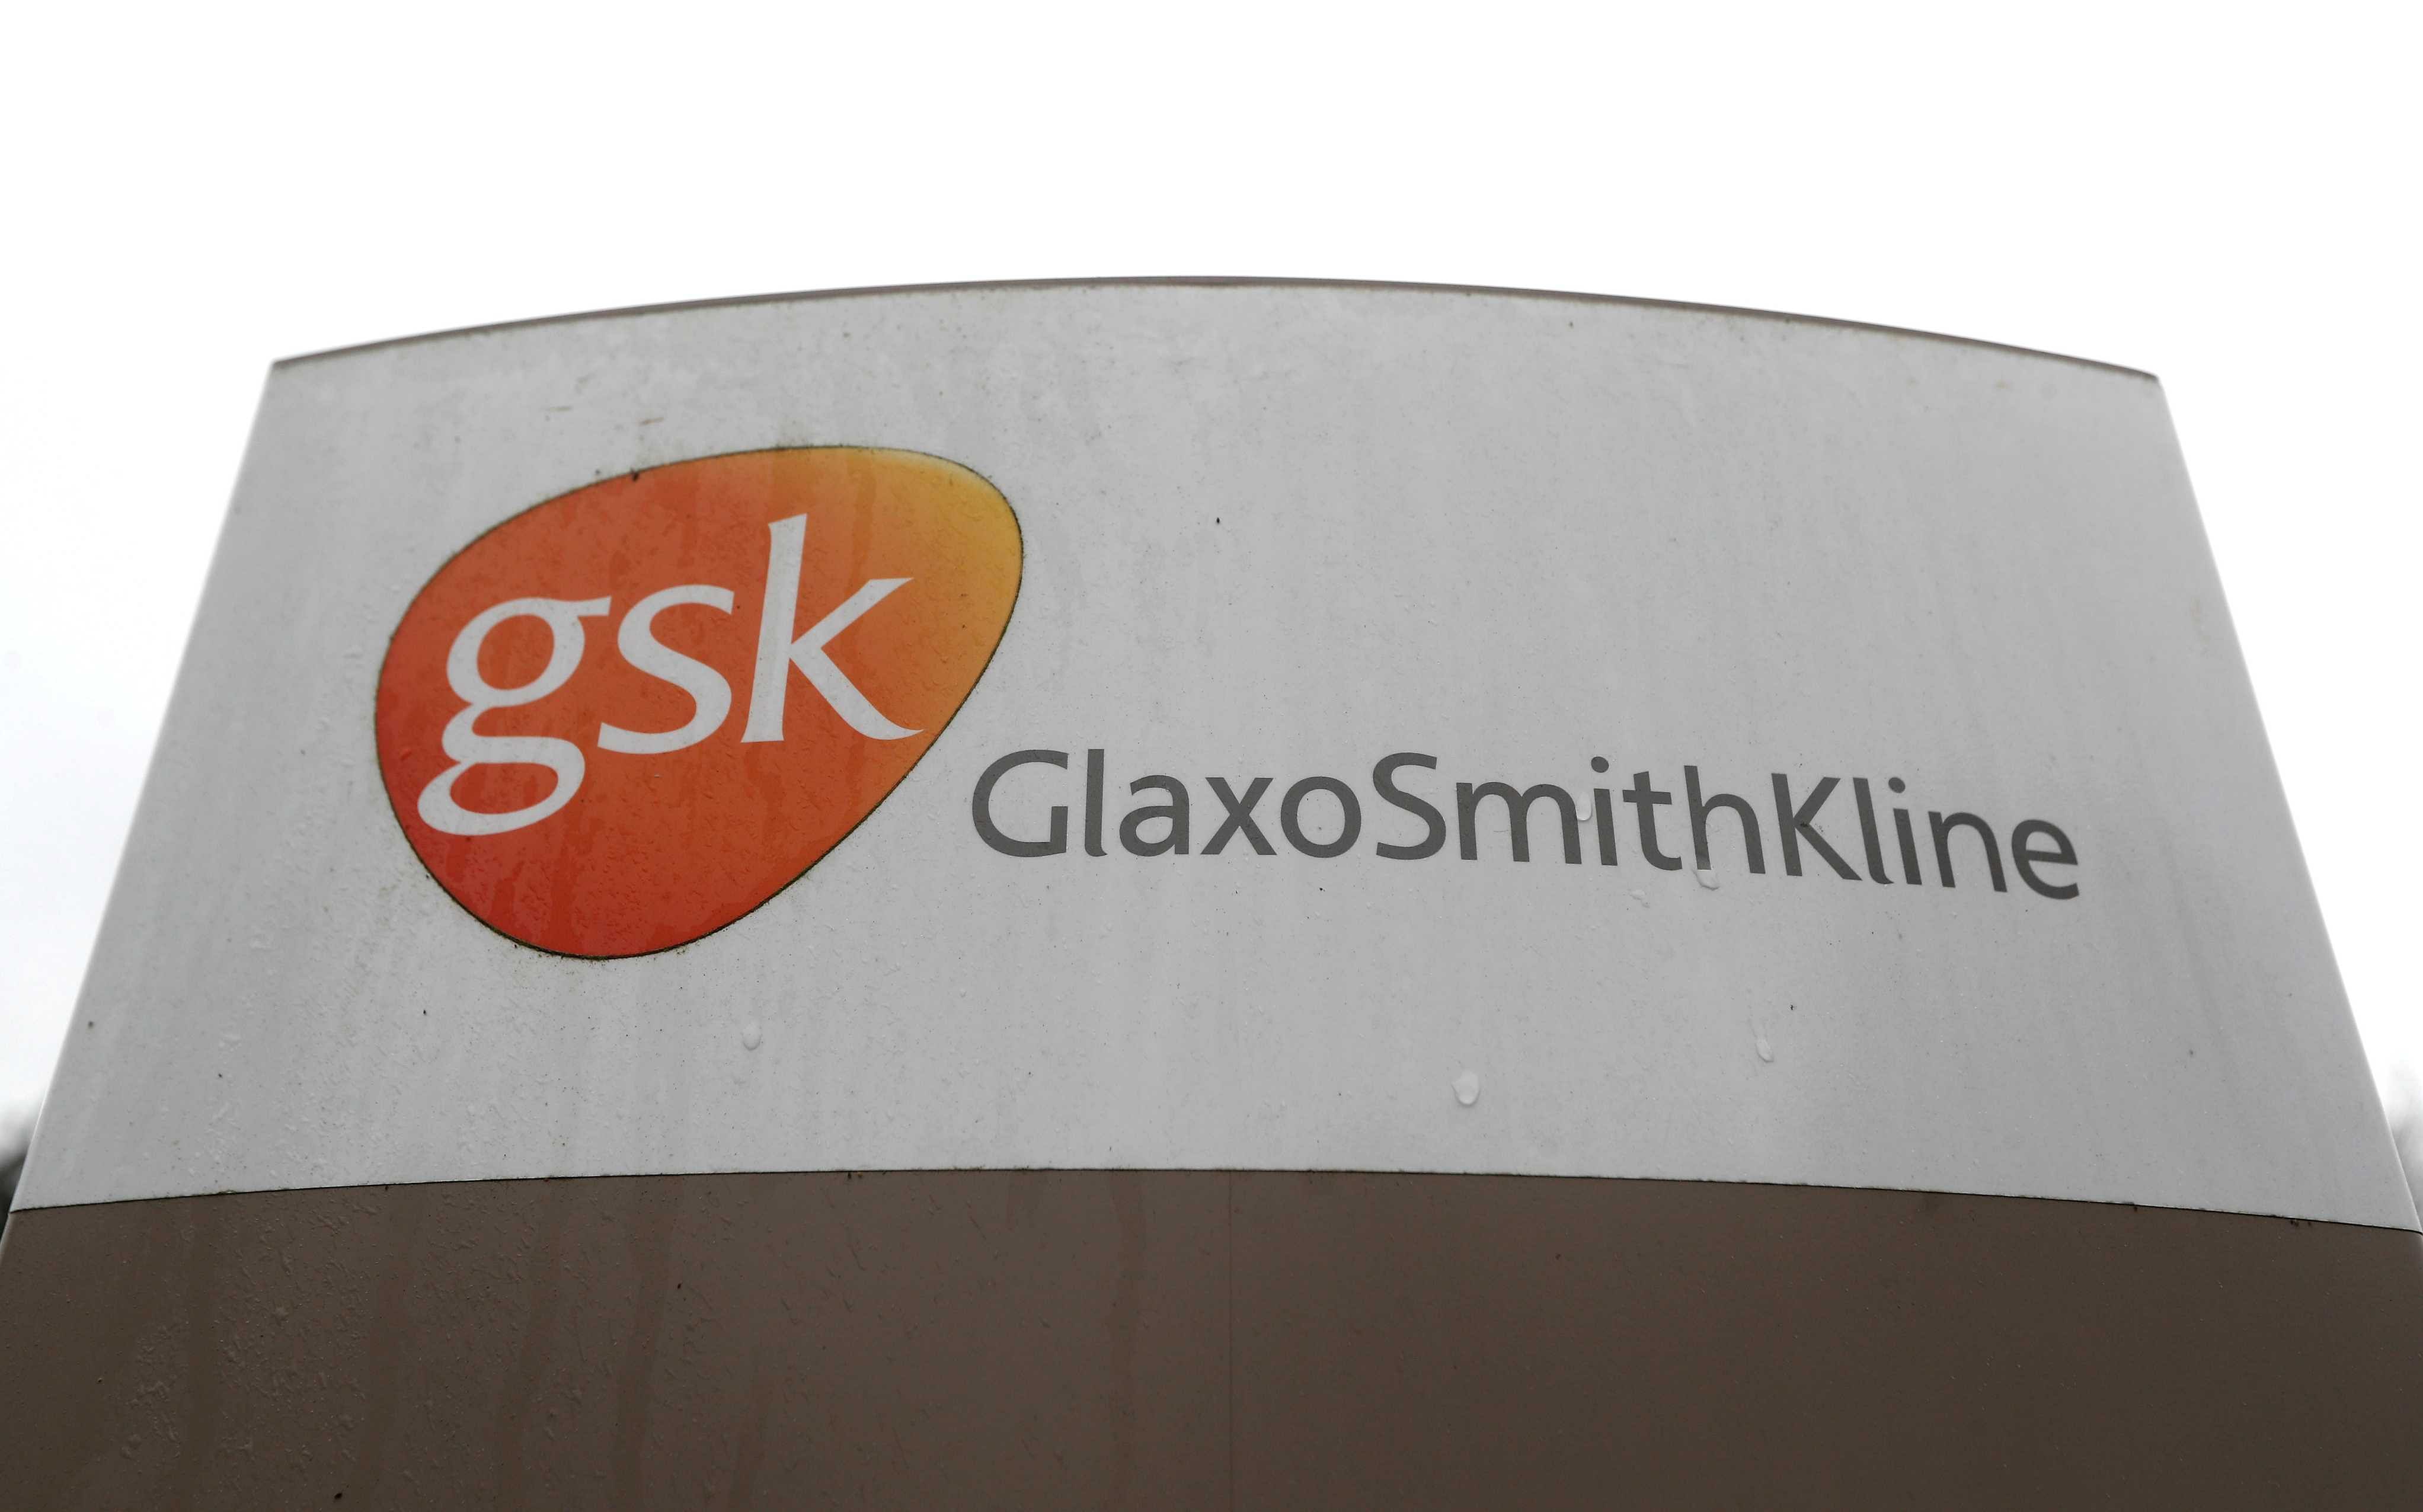 A GlaxoSmithKline (GSK) logo is seen at the GSK research centre in Stevenage, Britain (Reuters photo)